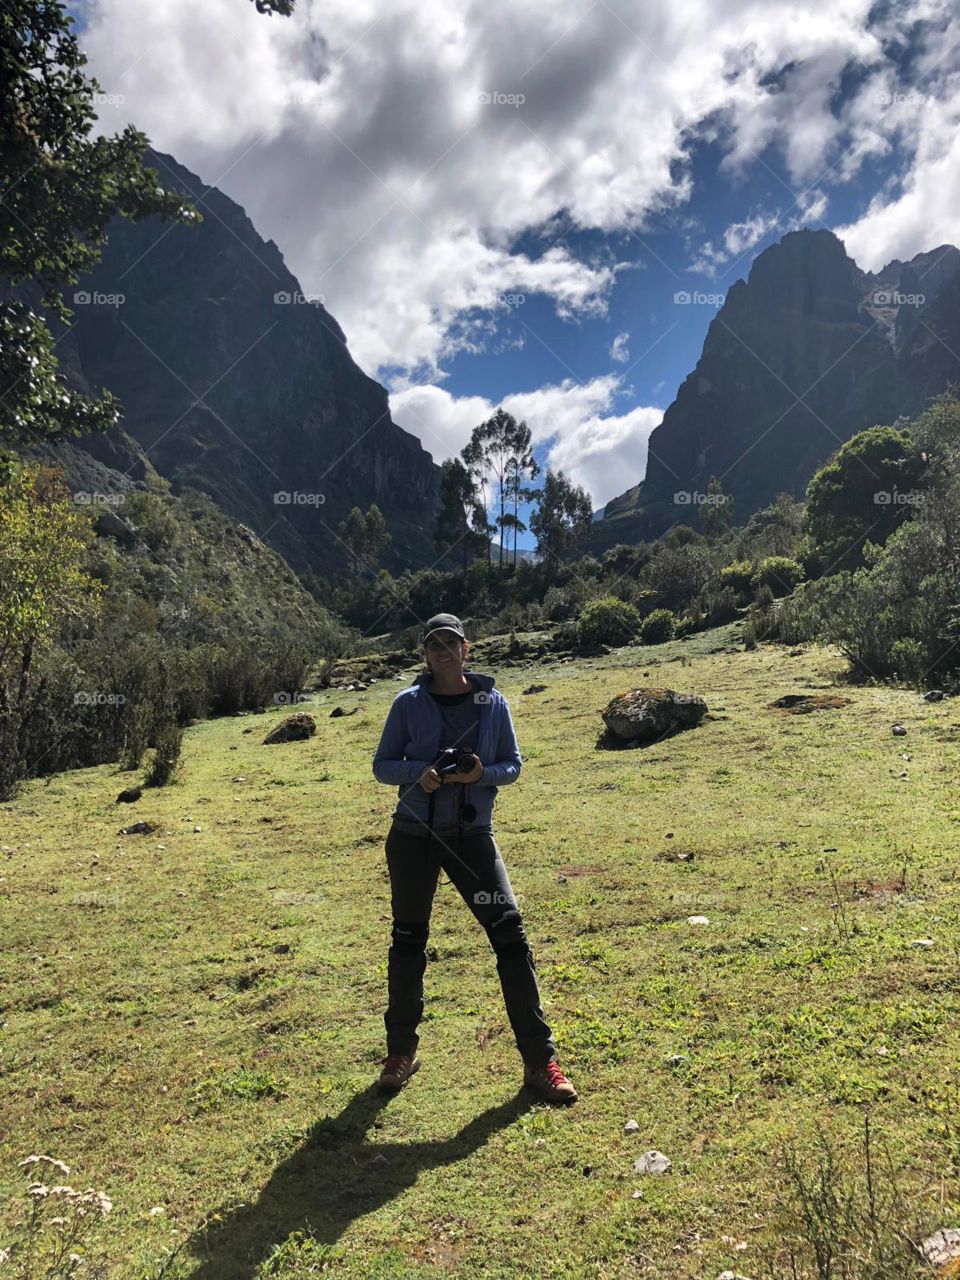 Ready to take a photo on a trail in the mountains of Peru